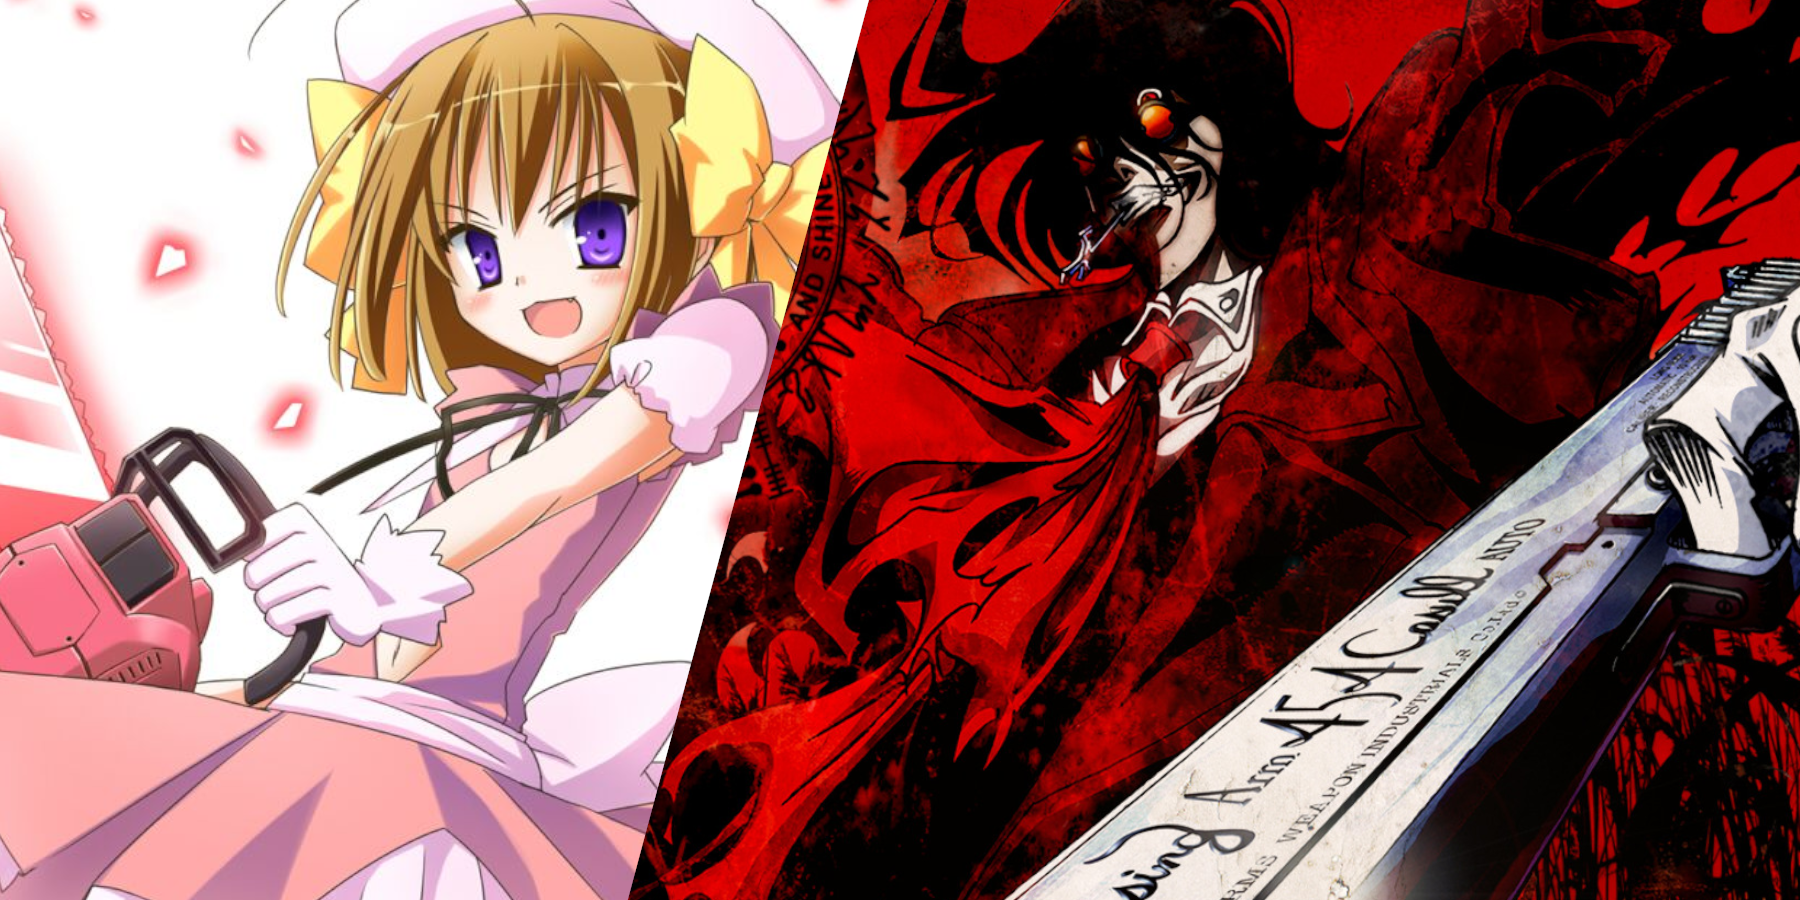 Crunchyroll is Streaming 20 Free Anime Series for Halloween